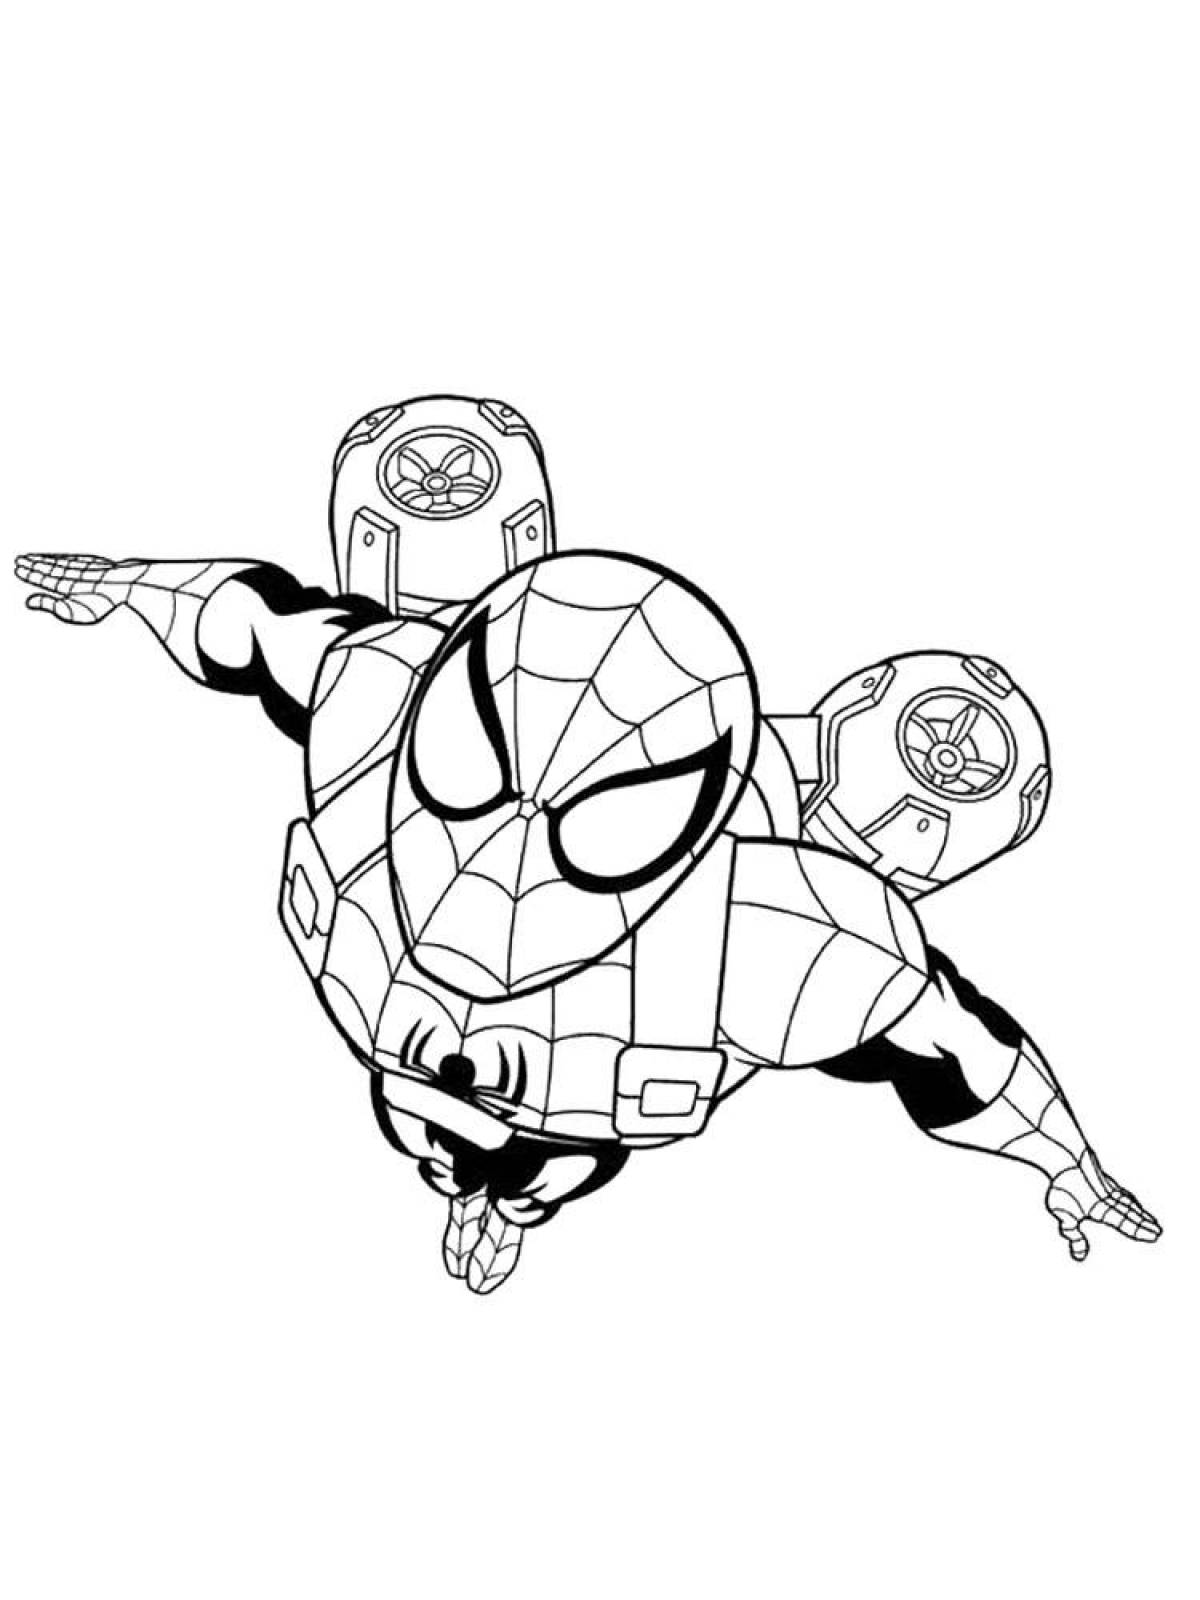 Comic iron man spiderman coloring page